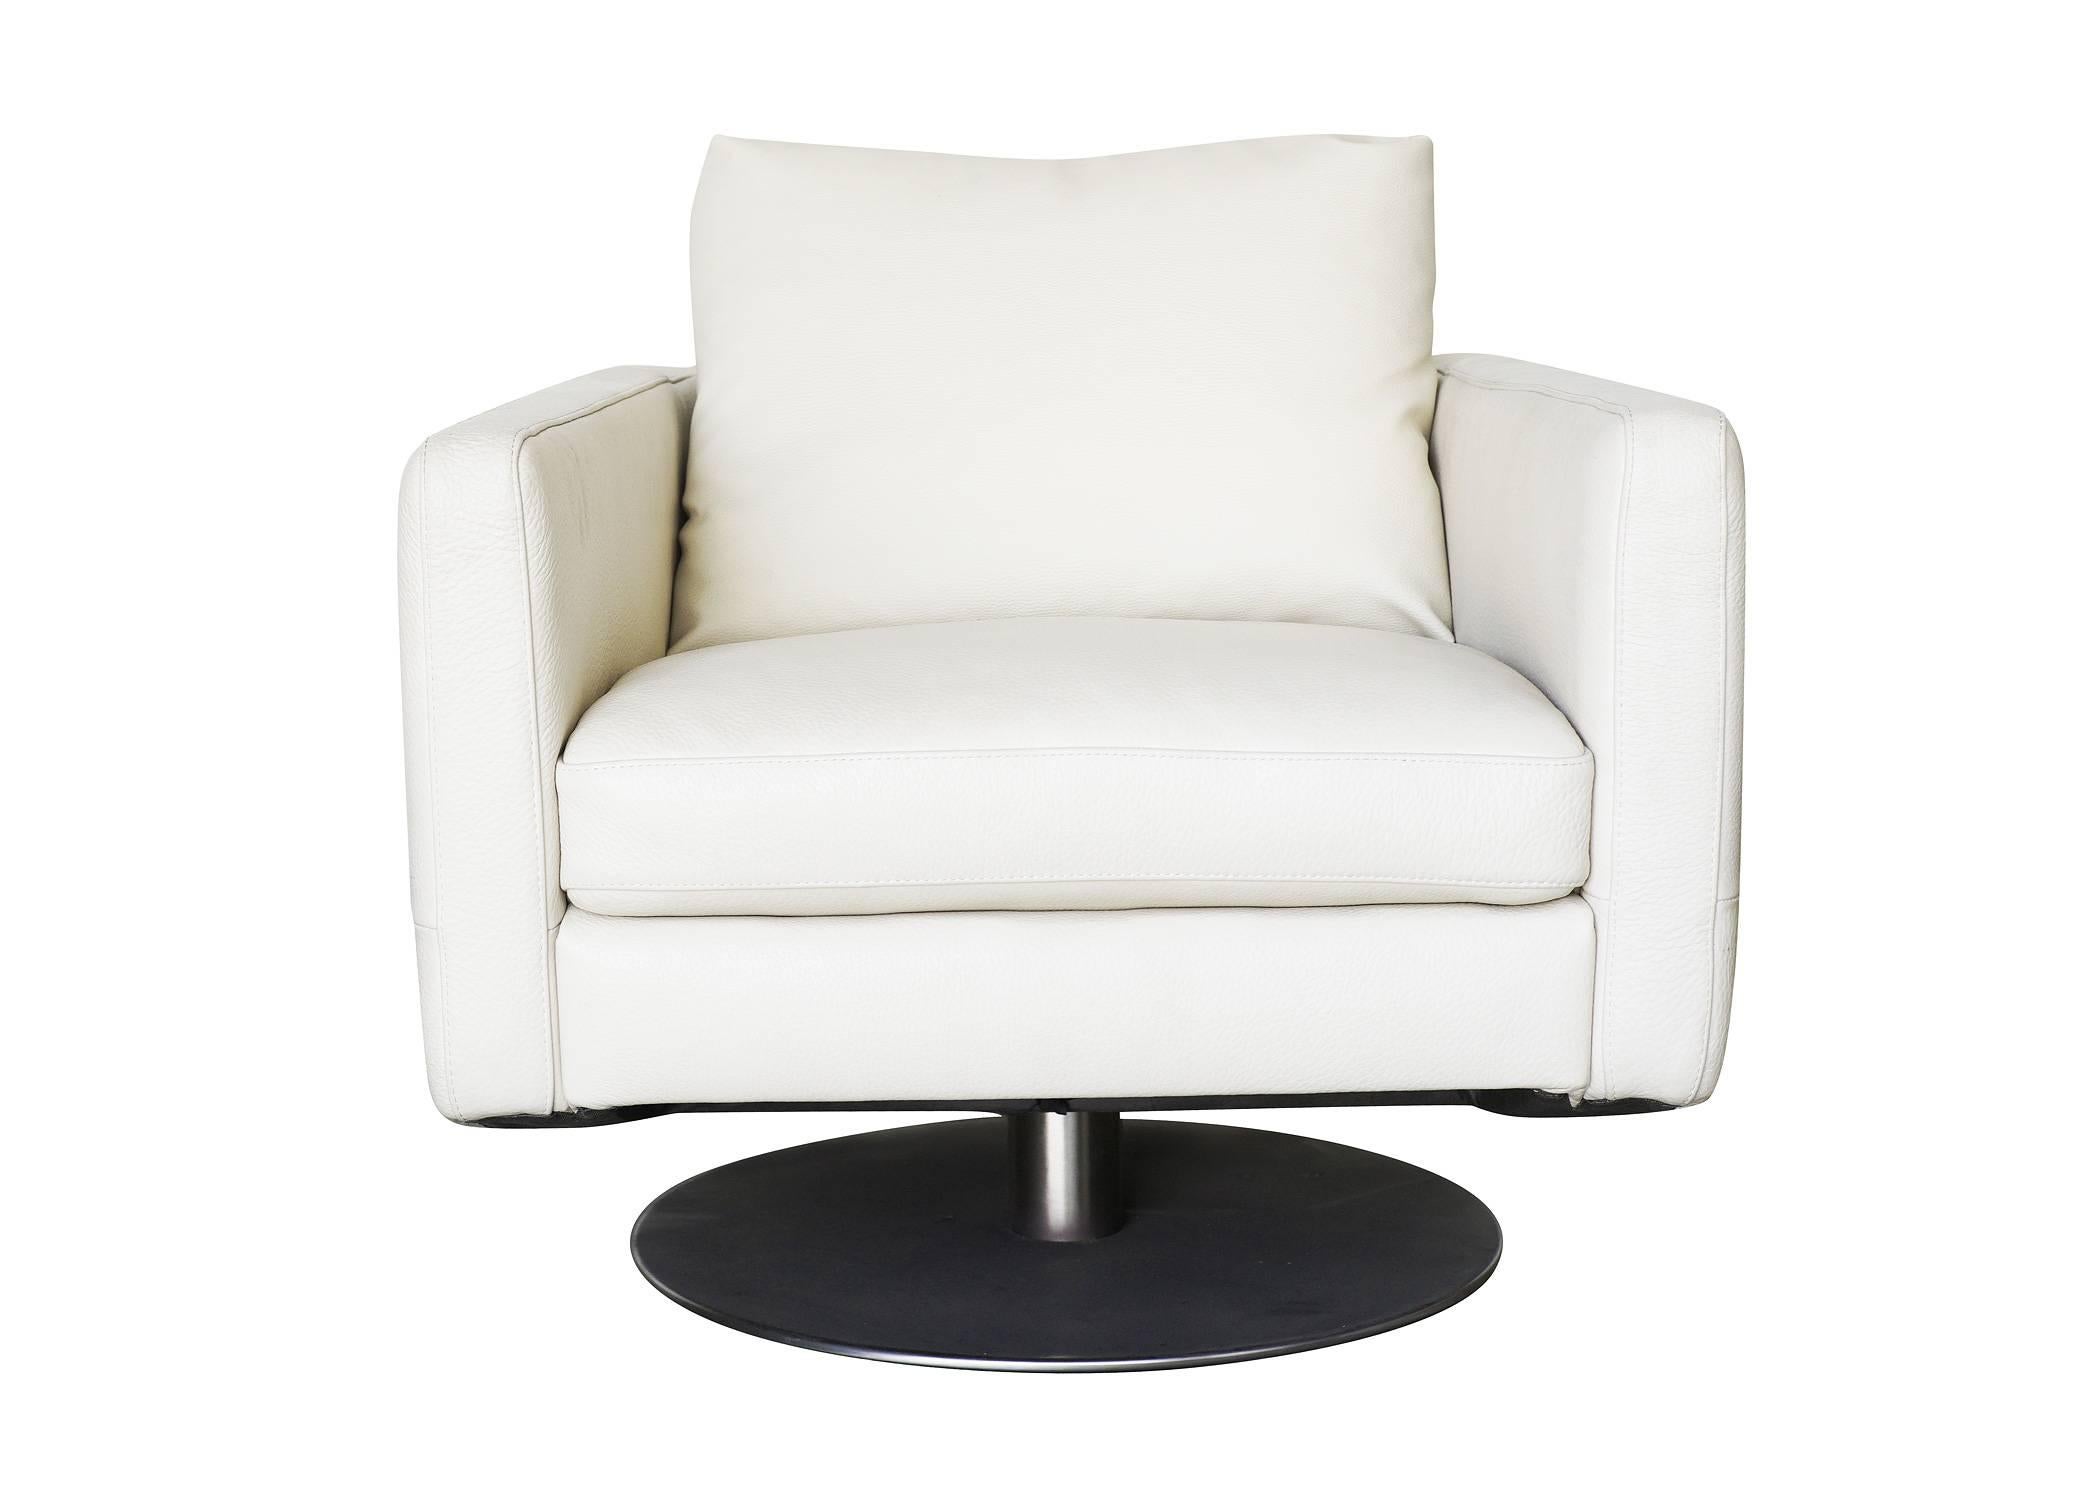 Modernist white swivel lounge chair with brush steel base and heavy vinyl covers by Permaguard.

Avalible: Two.